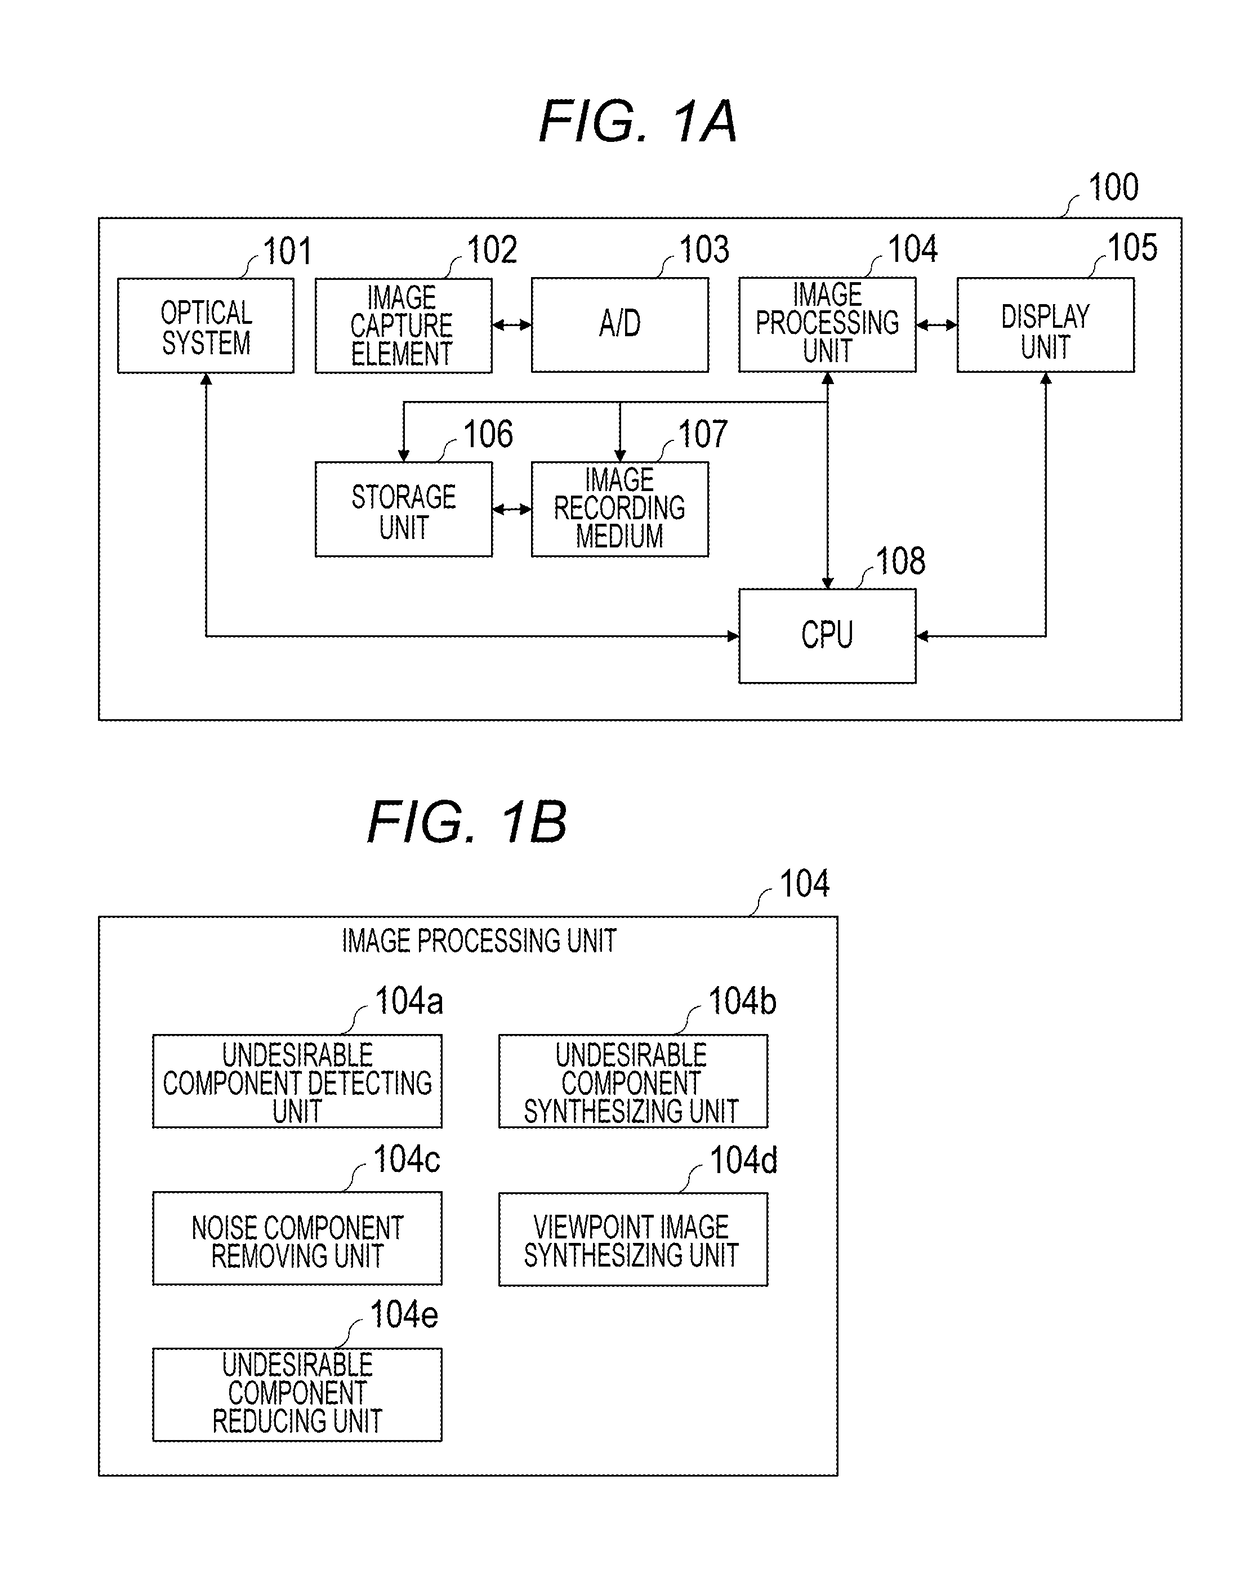 Image processing apparatus and a control method for controlling the image processing apparatus